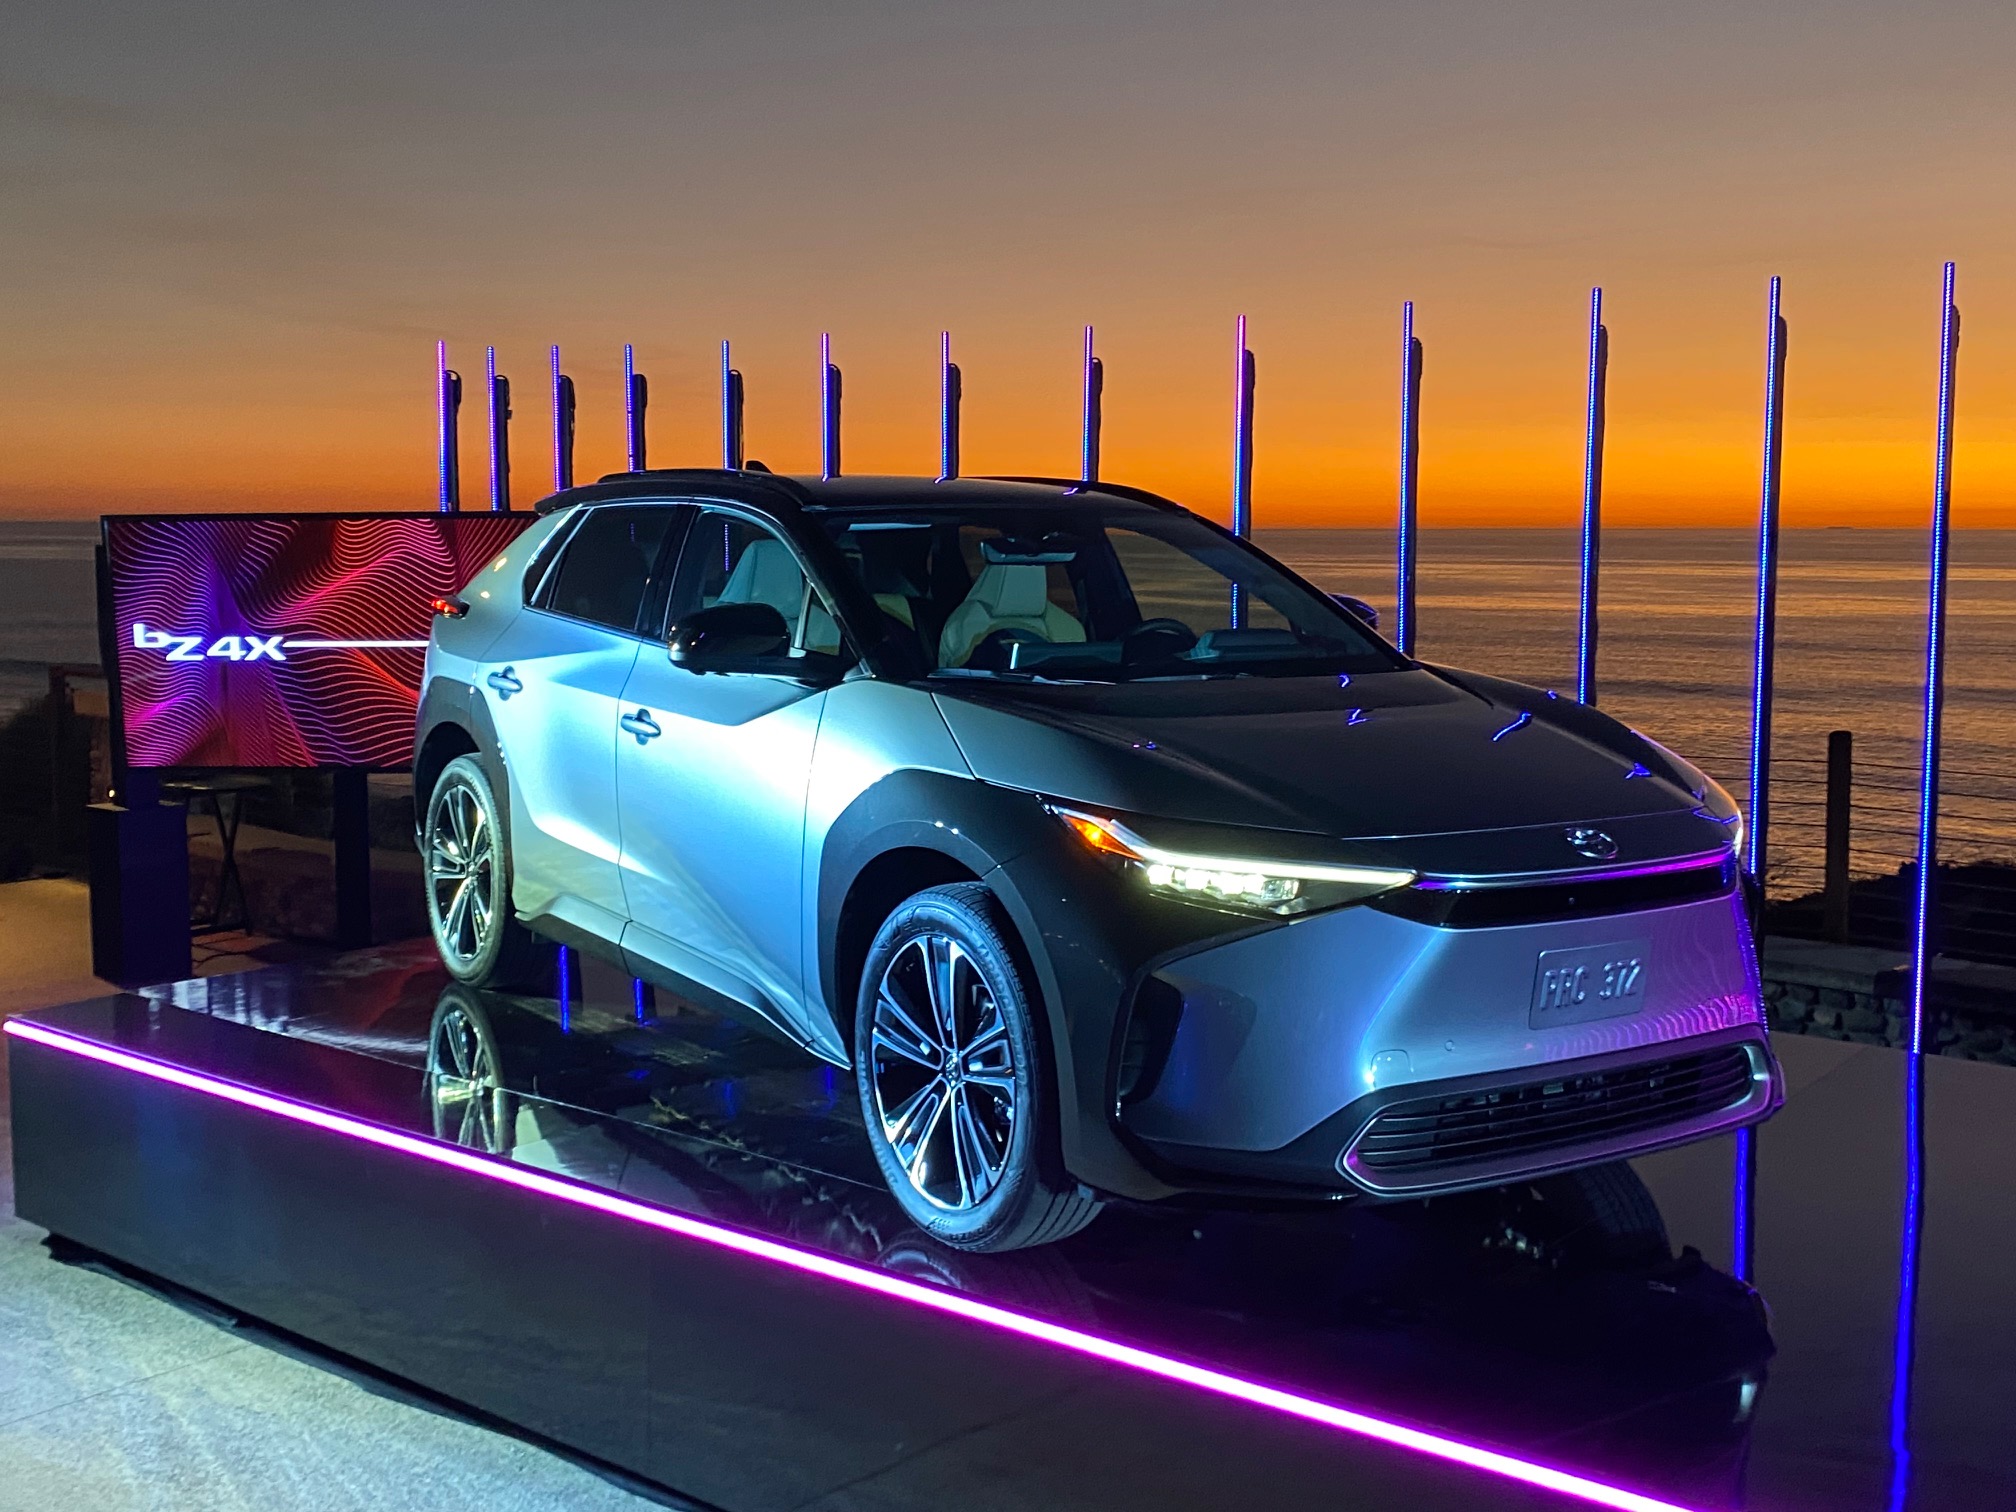 Preview: 2023 Toyota bZ4X EV confirmed for 250-mile estimated range, due in mid 2022Preview: 2023 Toyota bZ4X EV confirmed for 250-mile estimated range, due in mid 2022